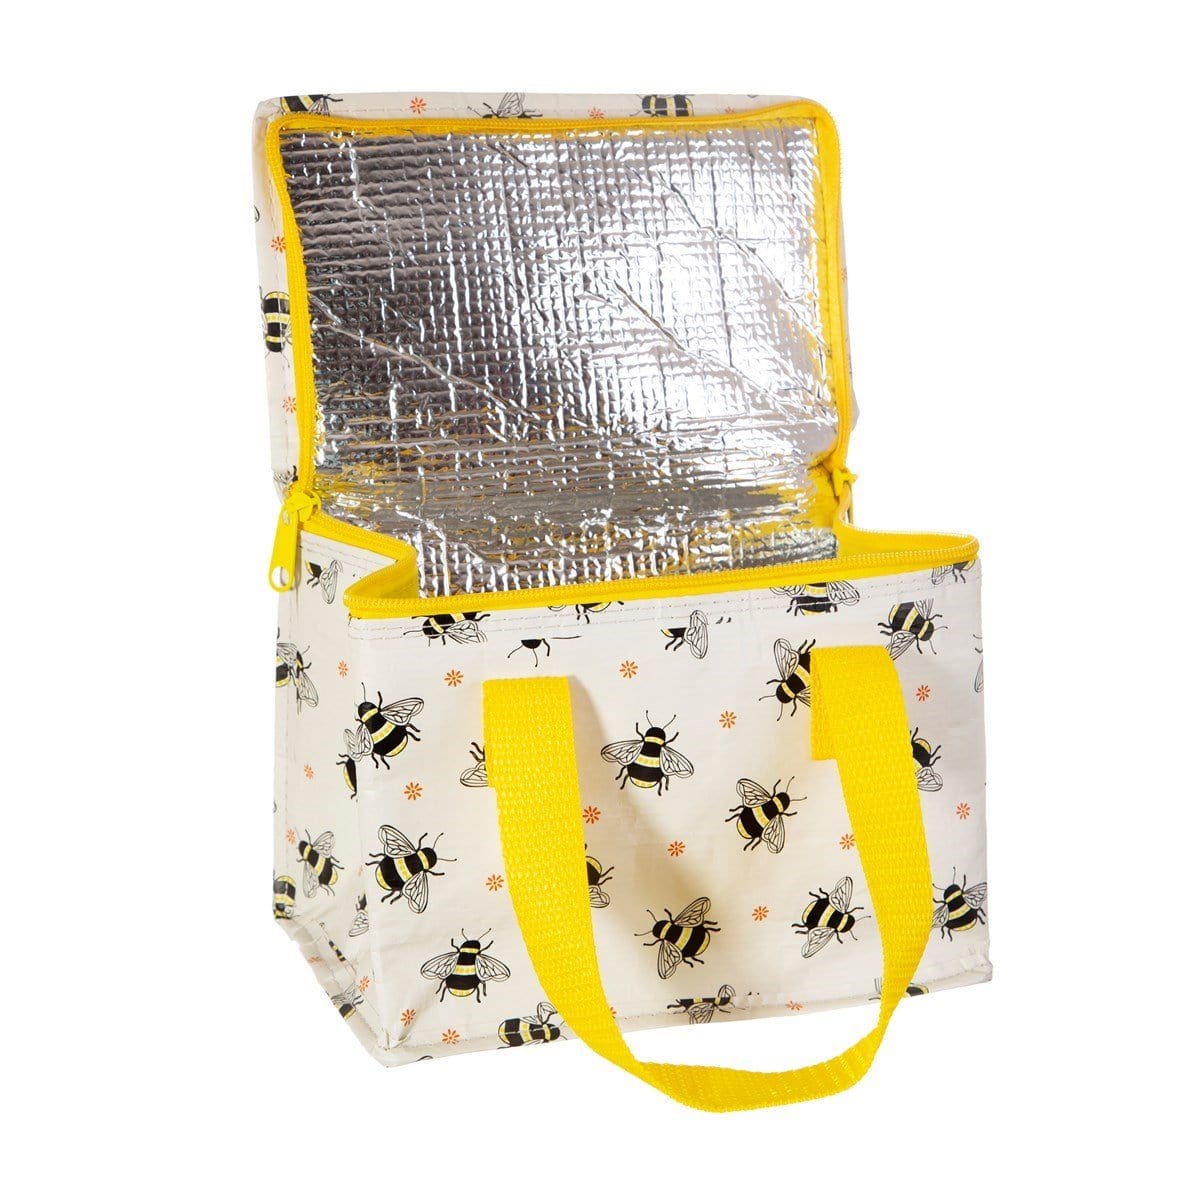 Busy Bees Lunch Bag - Kaftan direct